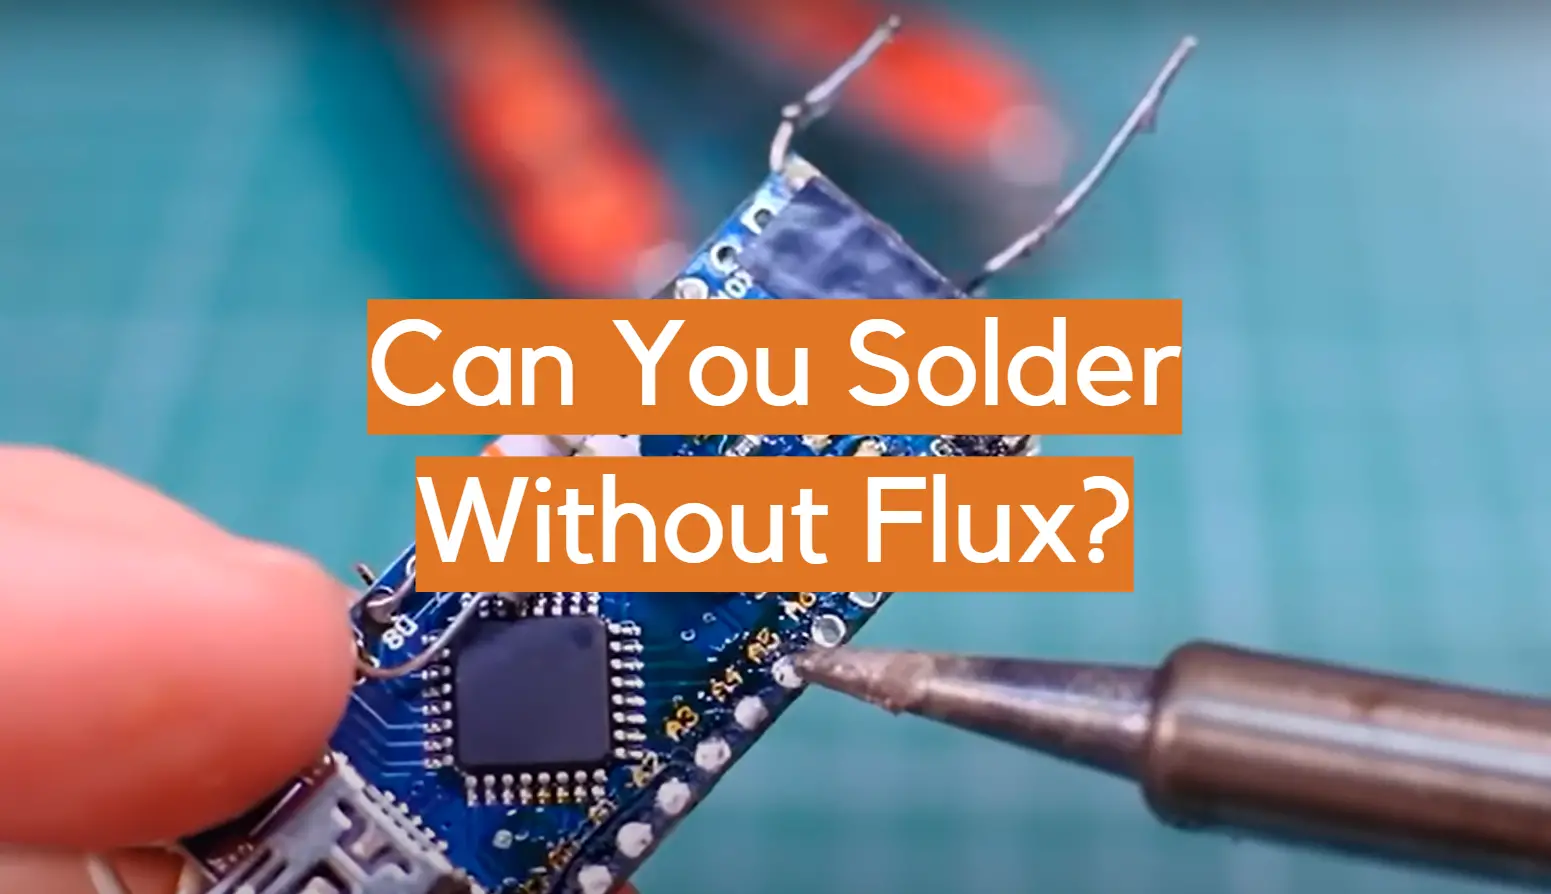 Can You Solder Without Flux?